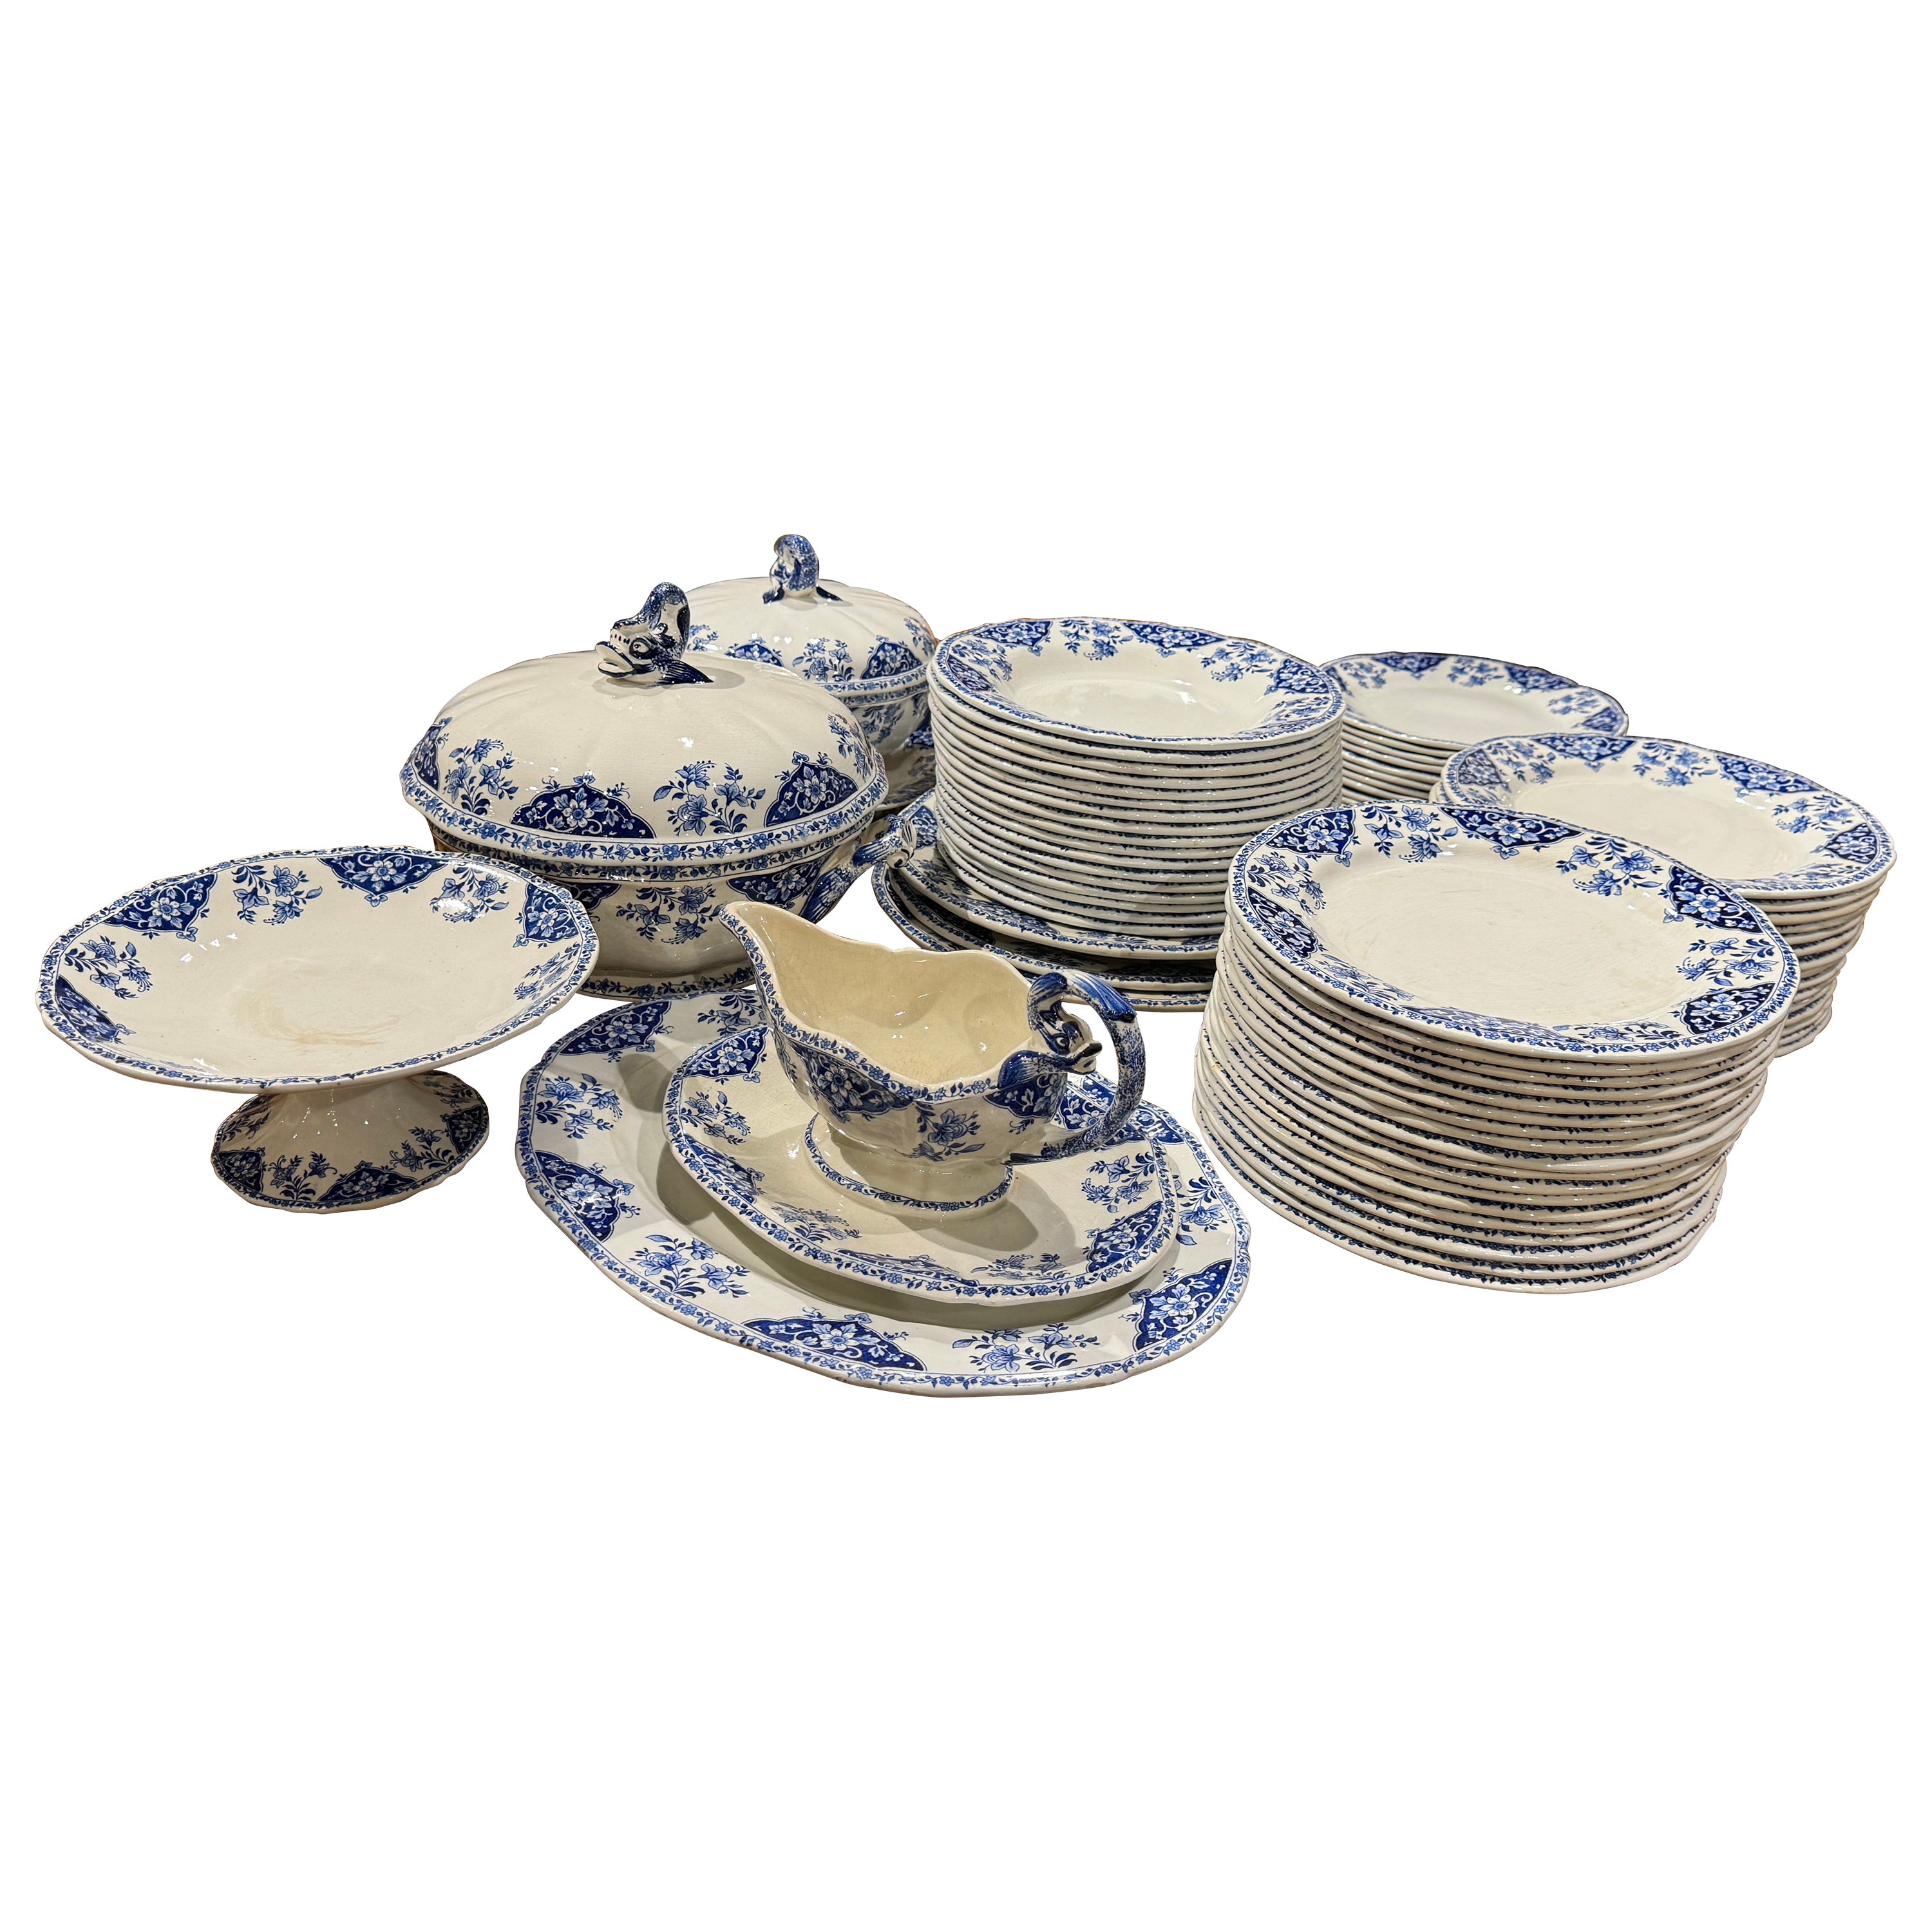 19th Century French Blue and White Gien Porcelain Dinnerware, 77 Pieces